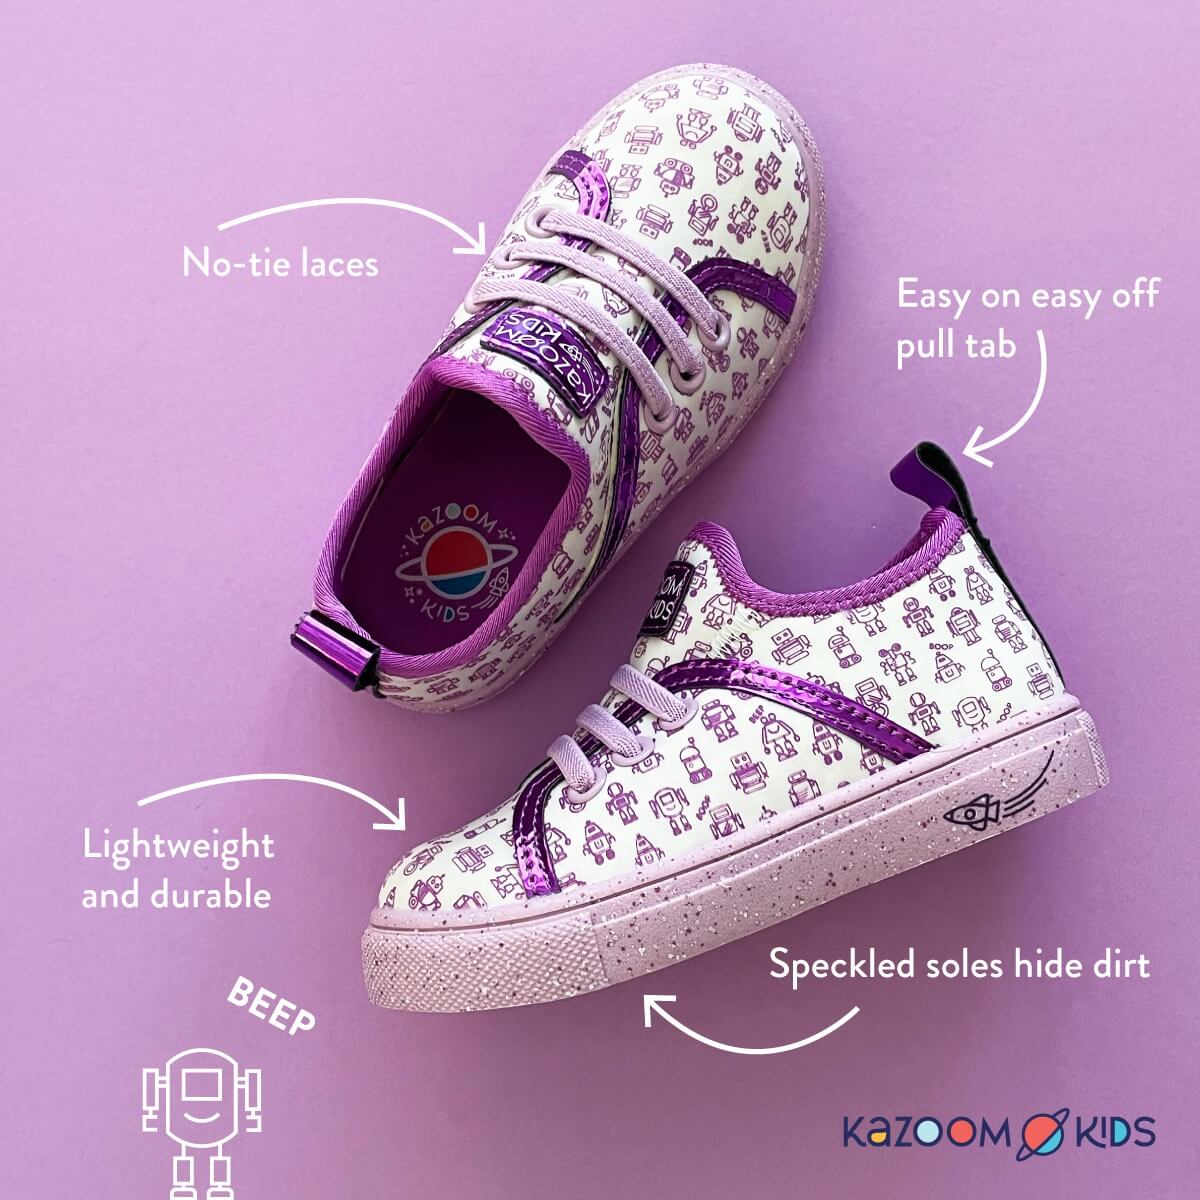 Purple Robots Toddler tennis shoe with call outs for no-tie laces, Easy on, and Speckled Soles